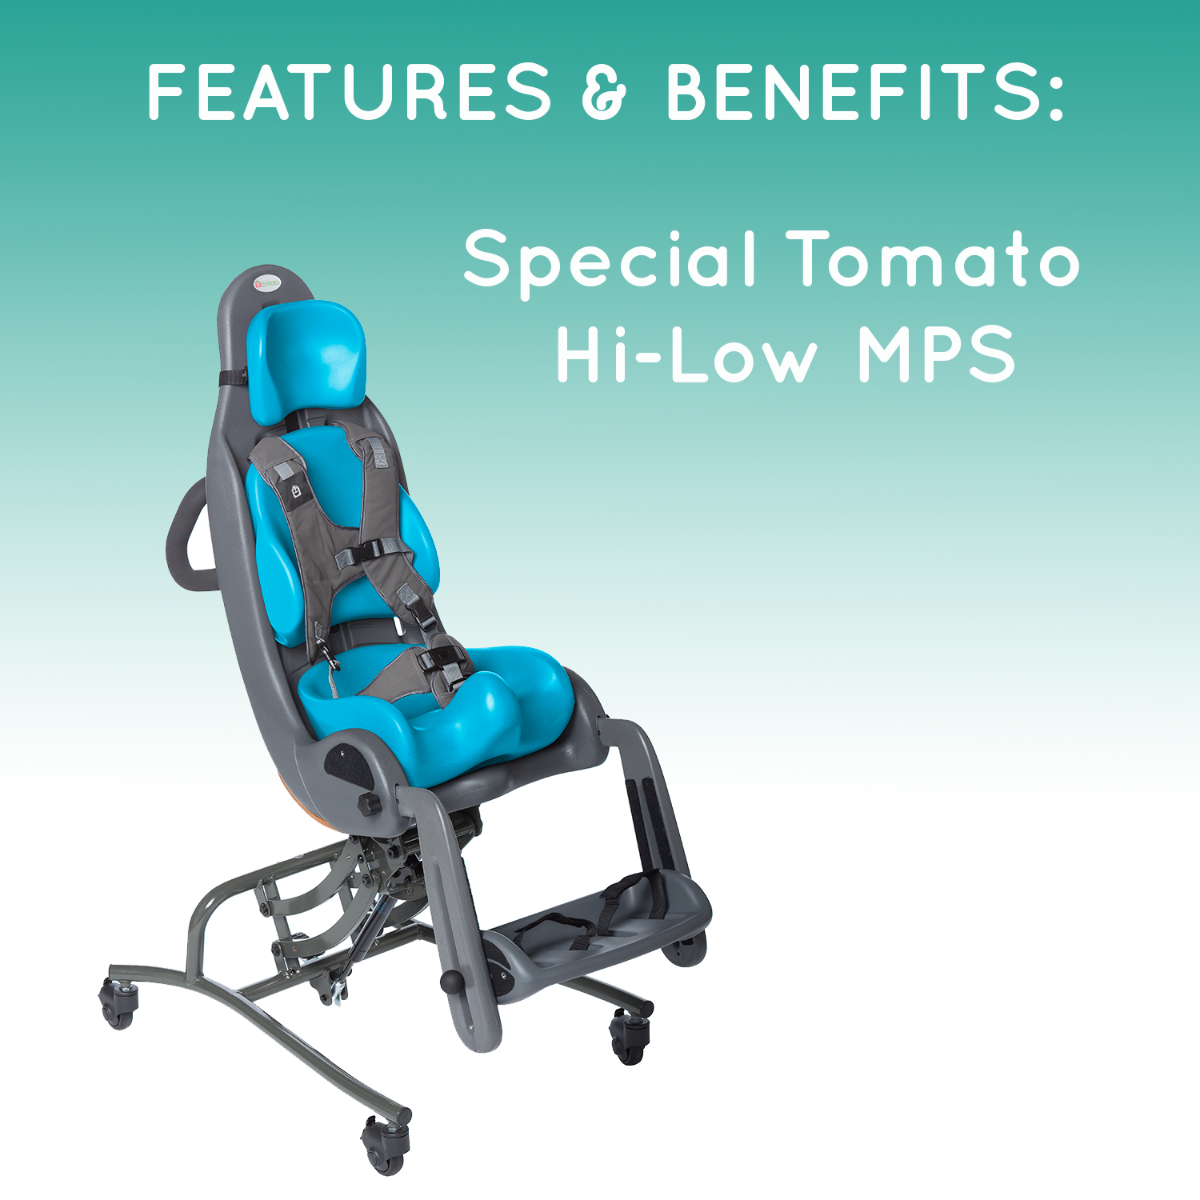 Features & Benefits: Special Tomato Hi-Low MPS